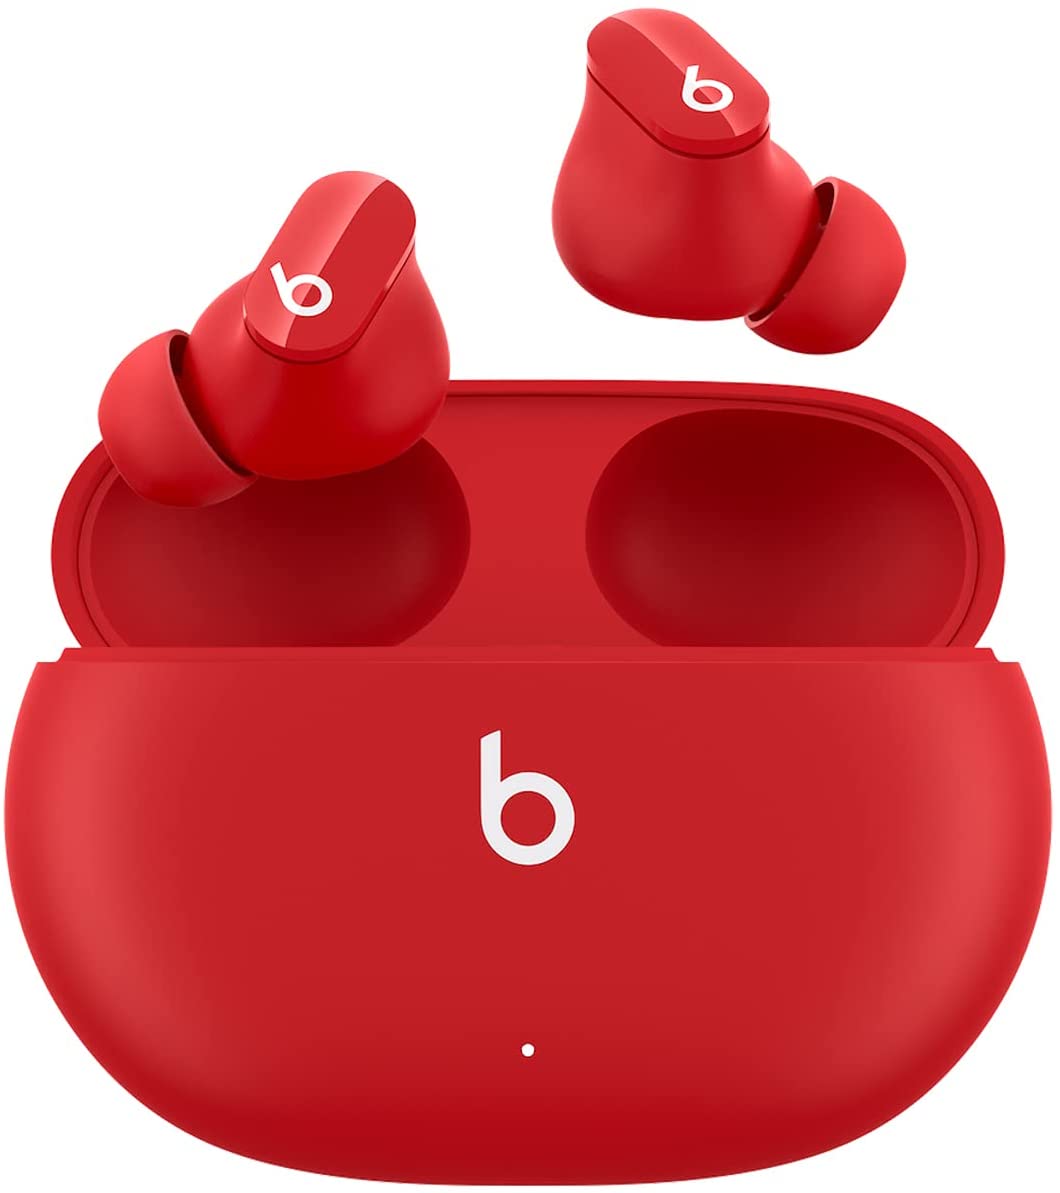 BEATS BY DR. DRE – BEATS STUDIO BUDS  – WIRELESS NOISE CANCELLING